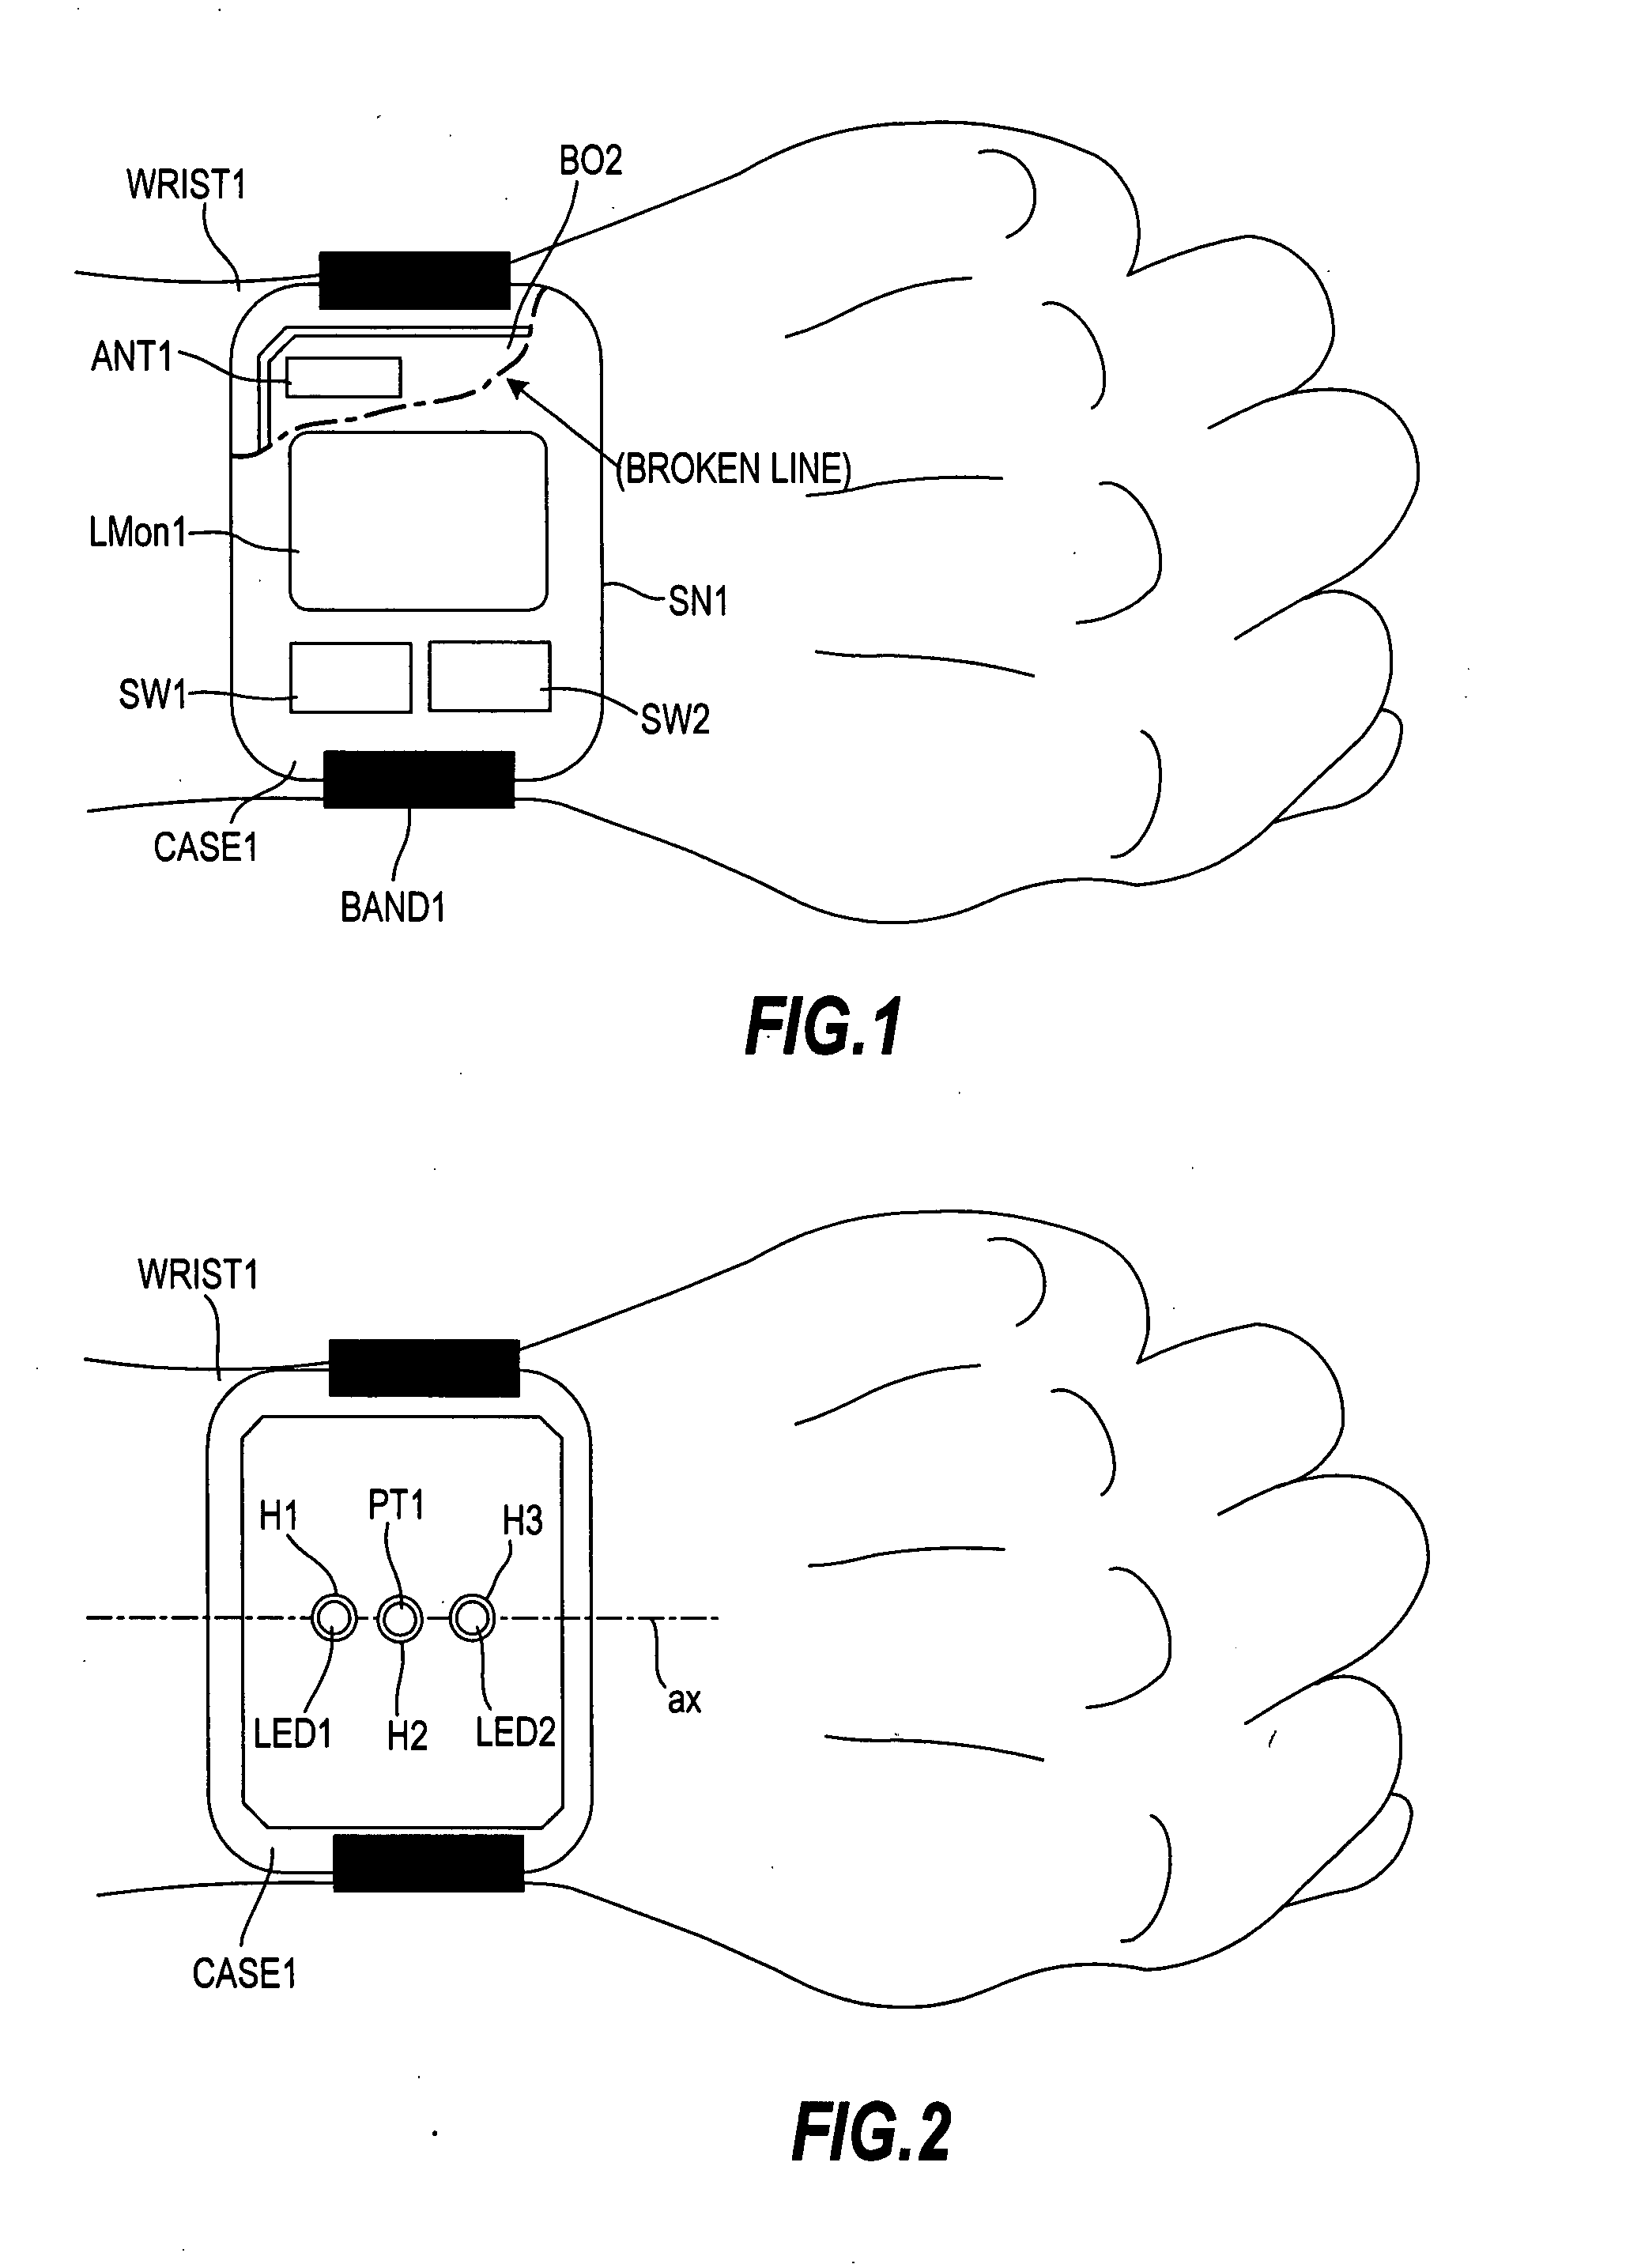 Controller for senor node, measurement method for biometric information and its software